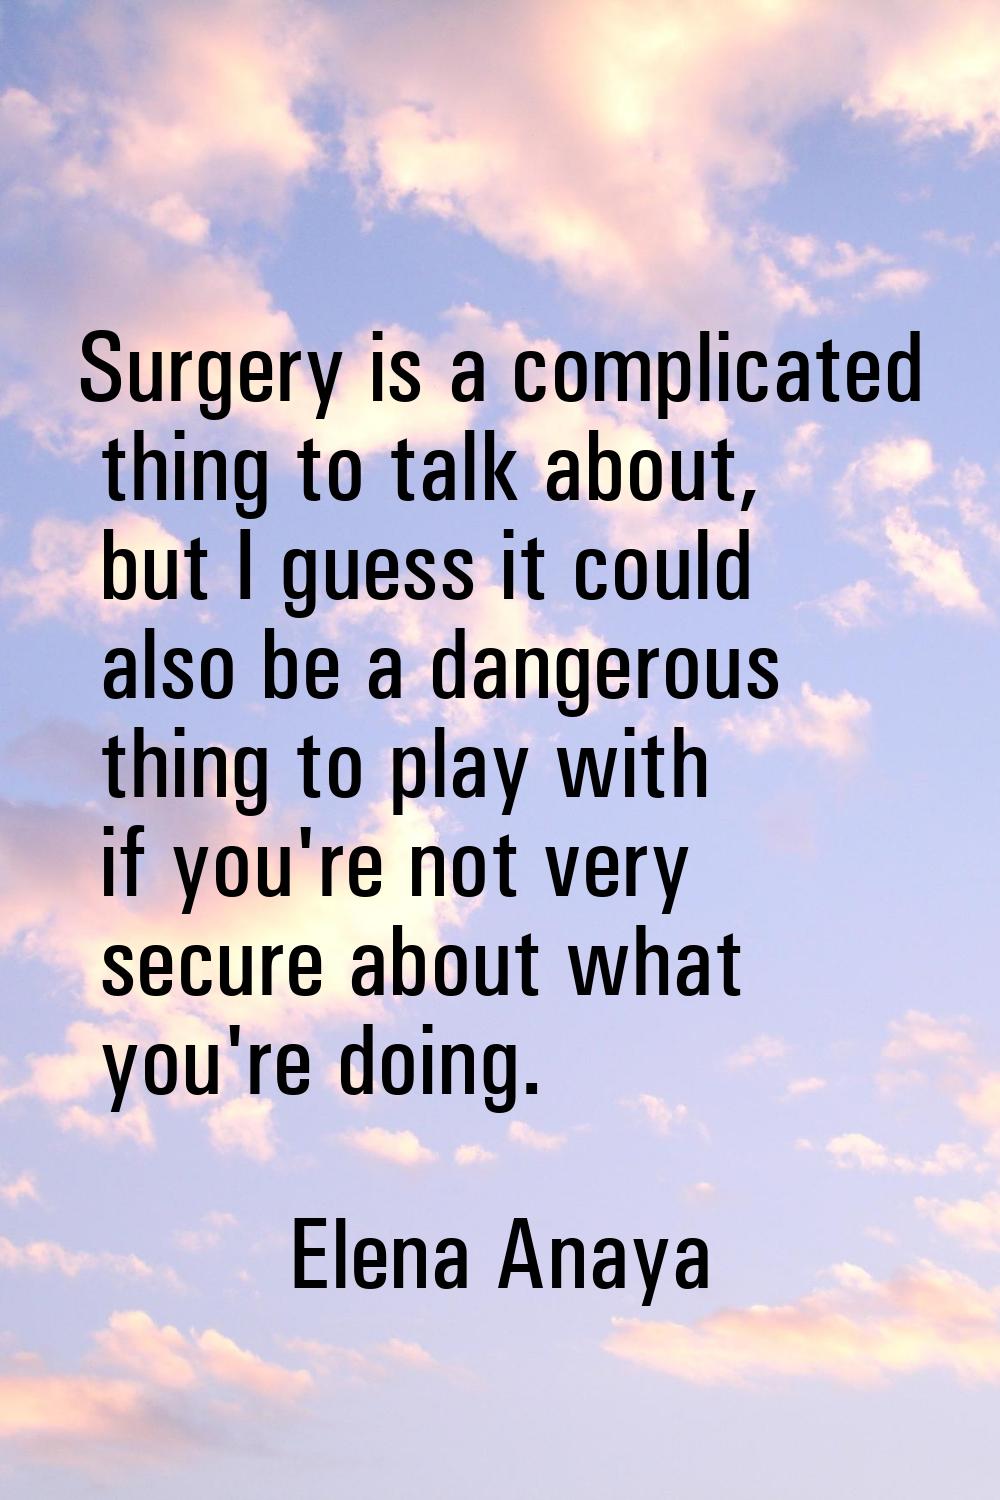 Surgery is a complicated thing to talk about, but I guess it could also be a dangerous thing to pla